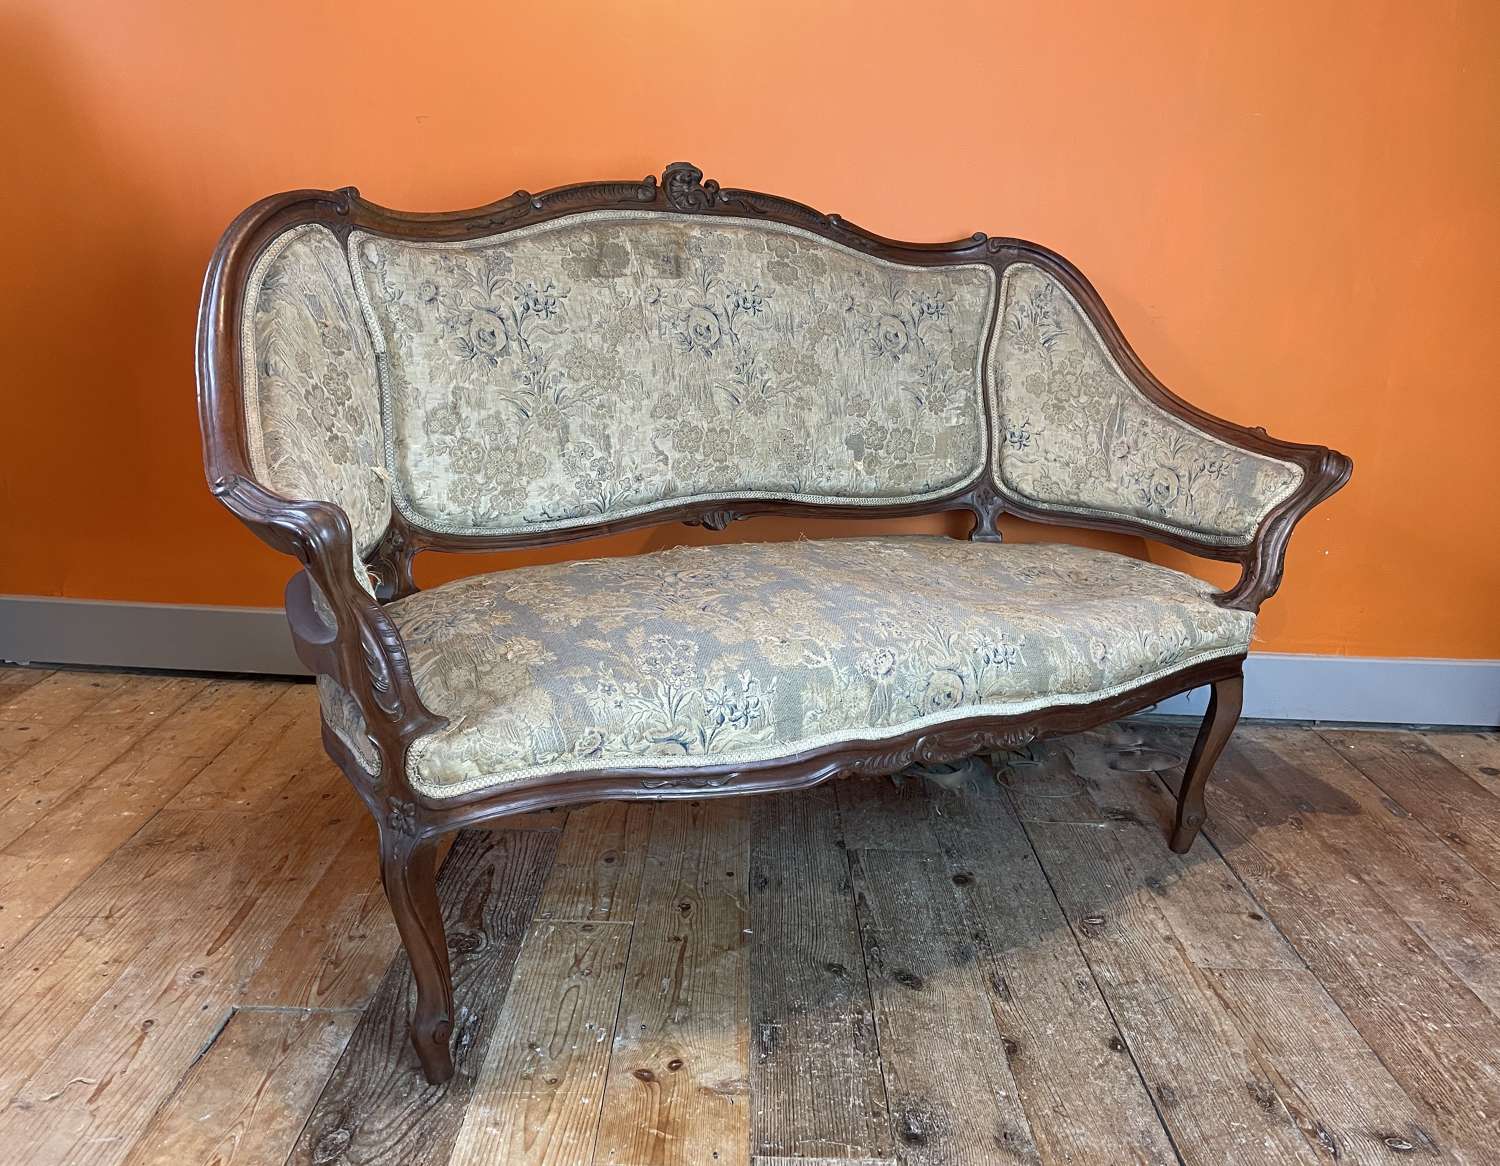 19th Century French Louis XV Style Walnut Canape Sofa for Recovering